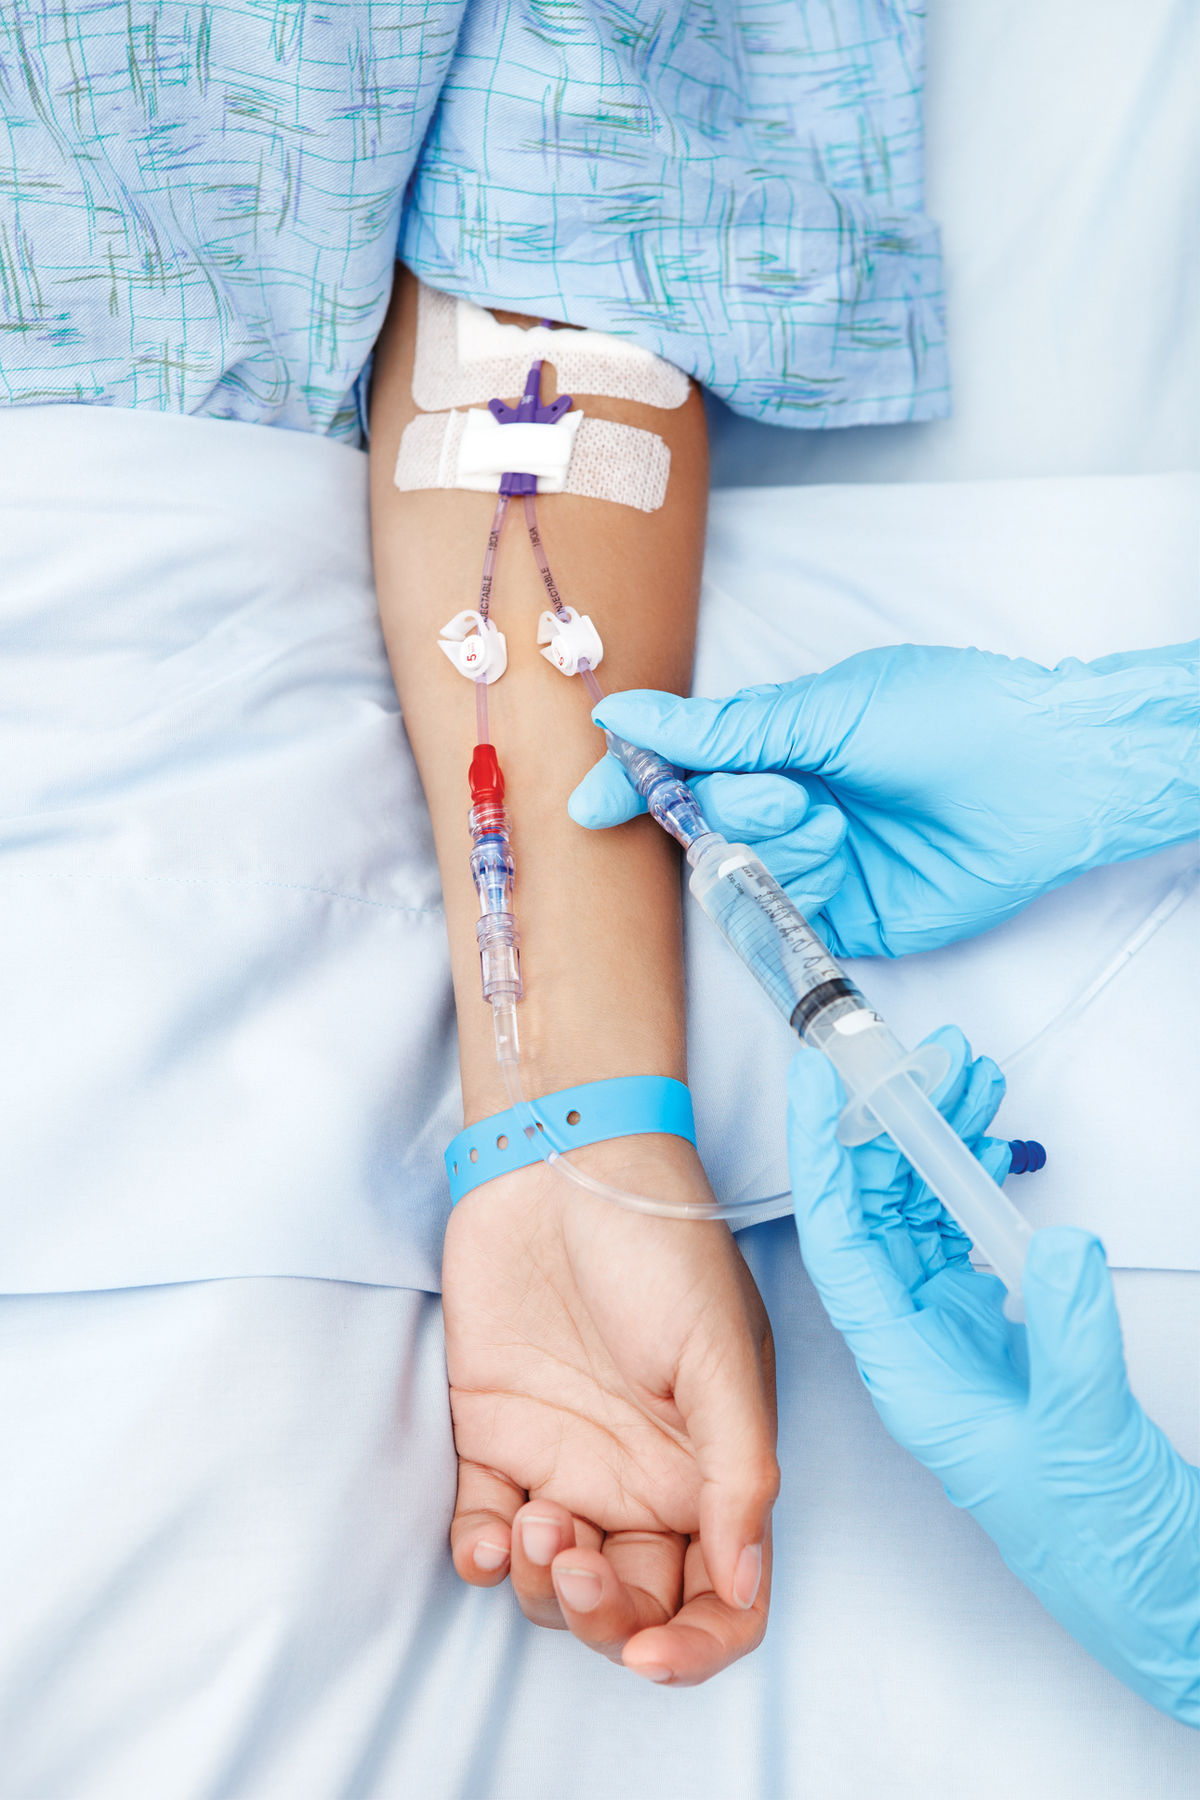 Common Types of IV Infusion Therapy